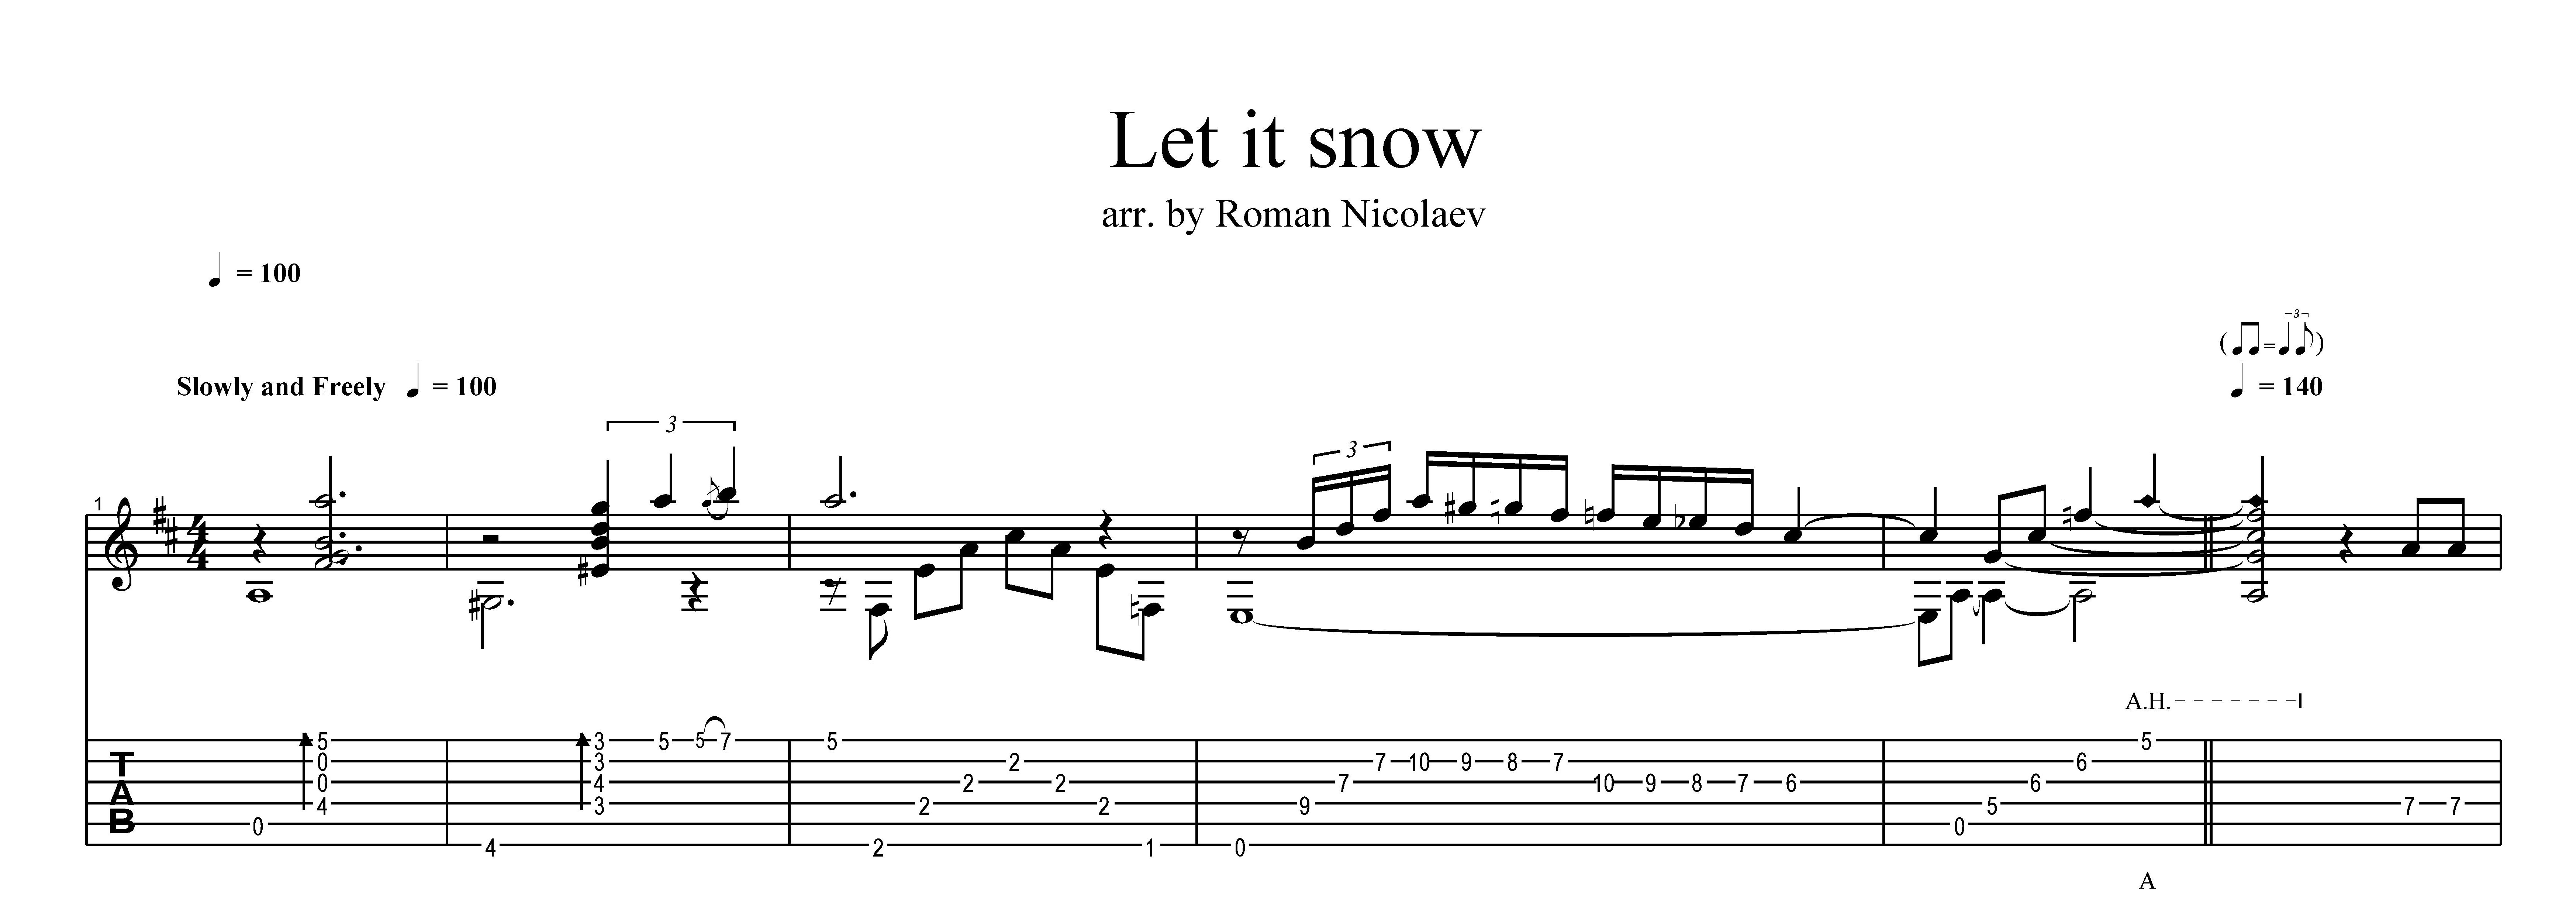 who wrote the song let it snow